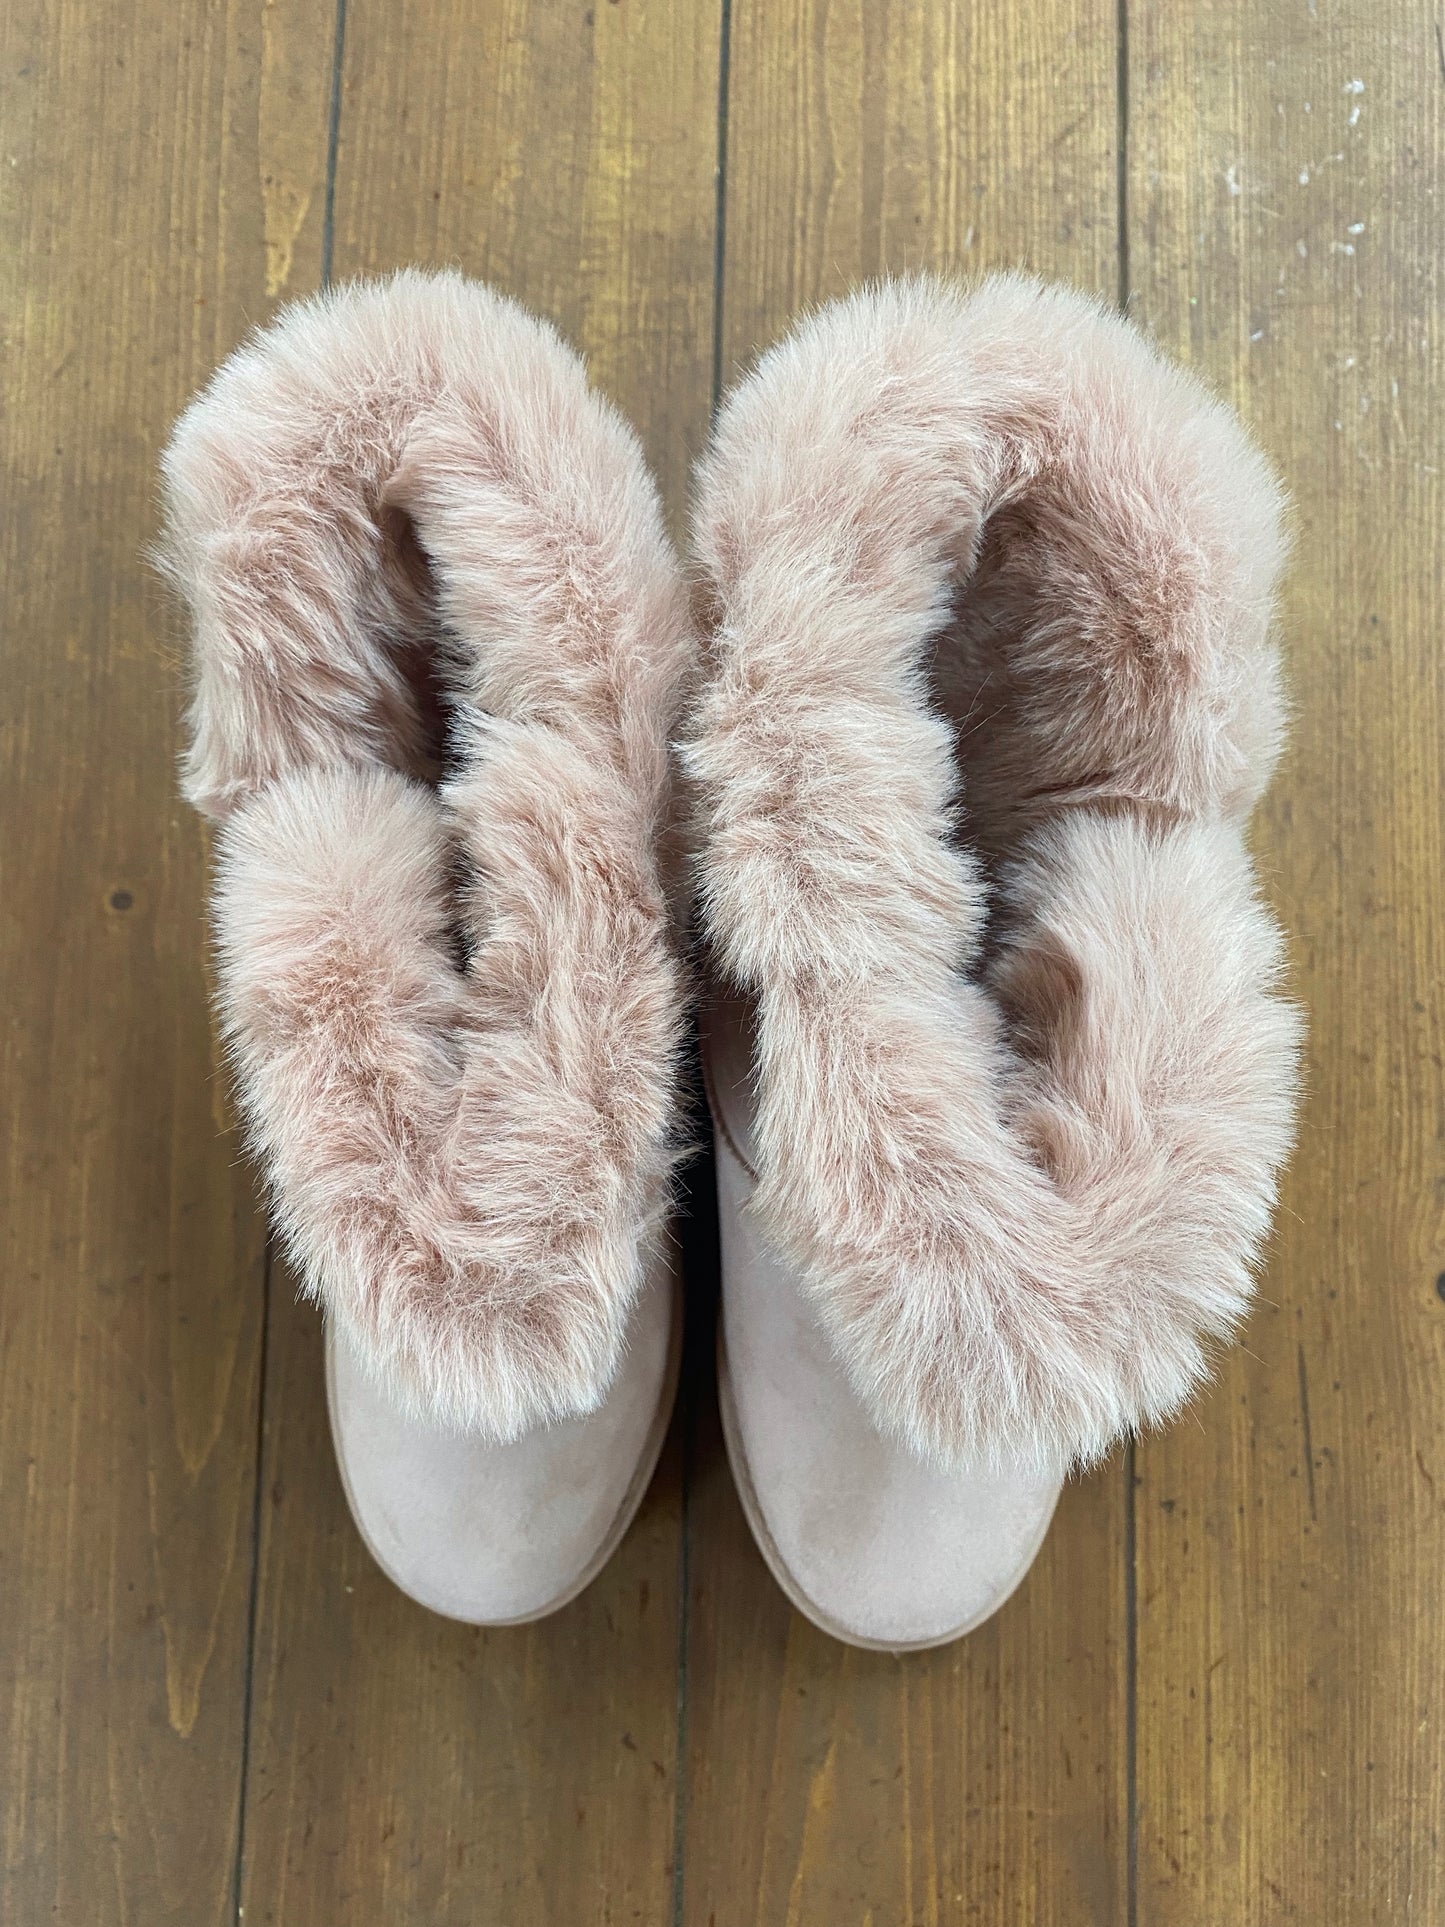 Charlie Paige Fur Cuff Boots - Whitt & Co. Clothing